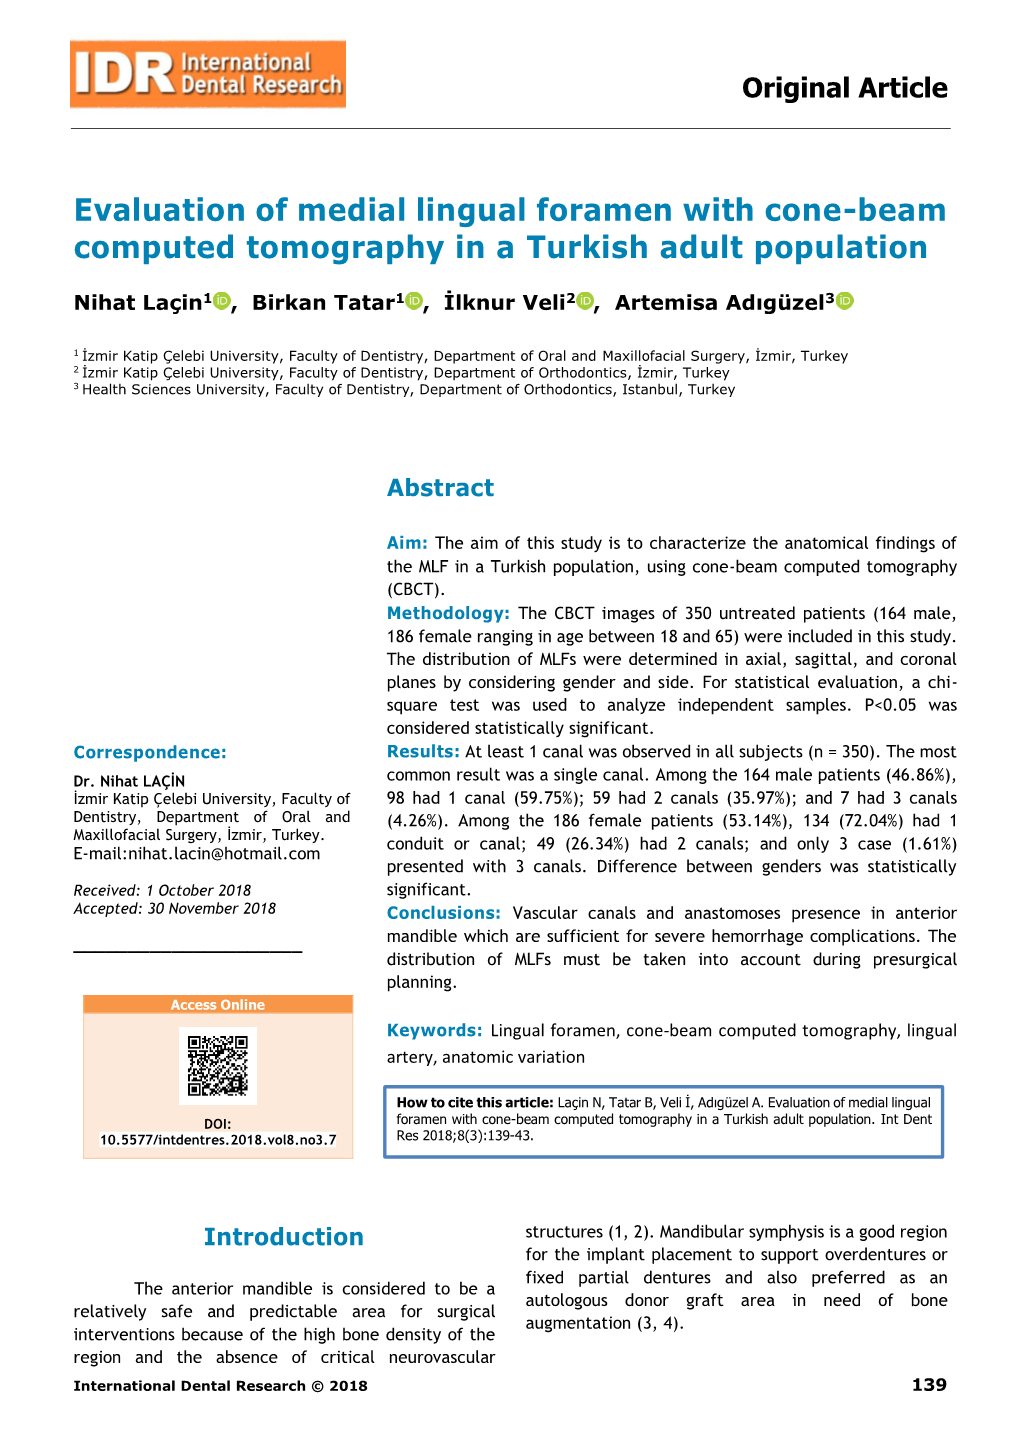 Evaluation of Medial Lingual Foramen with Cone-Beam Computed Tomography in a Turkish Adult Population